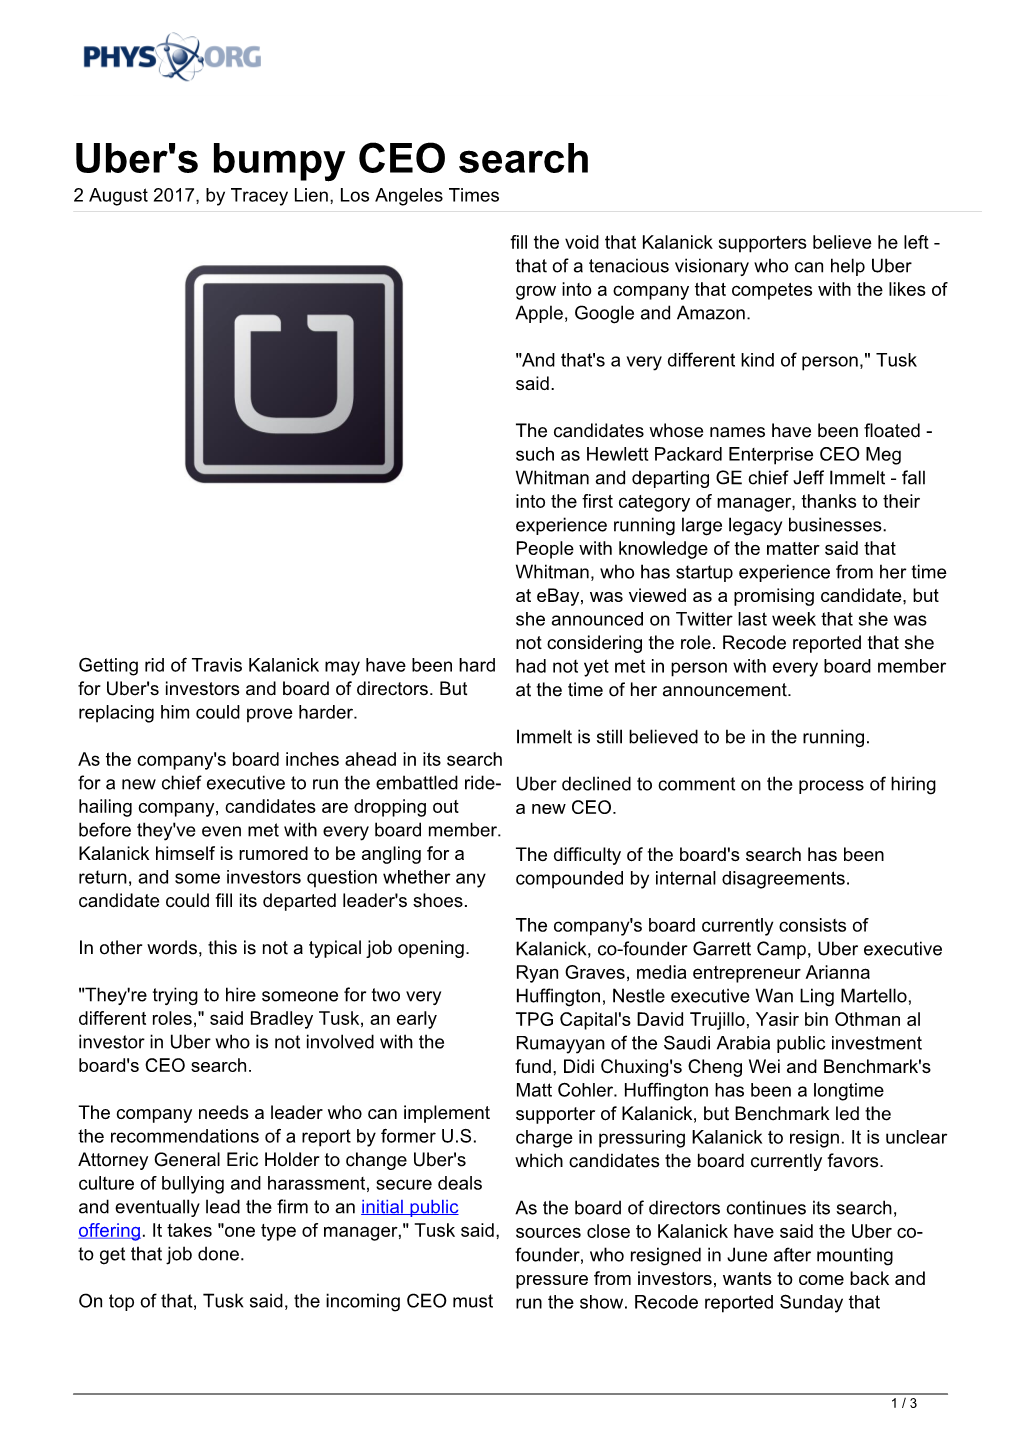 Uber's Bumpy CEO Search 2 August 2017, by Tracey Lien, Los Angeles Times